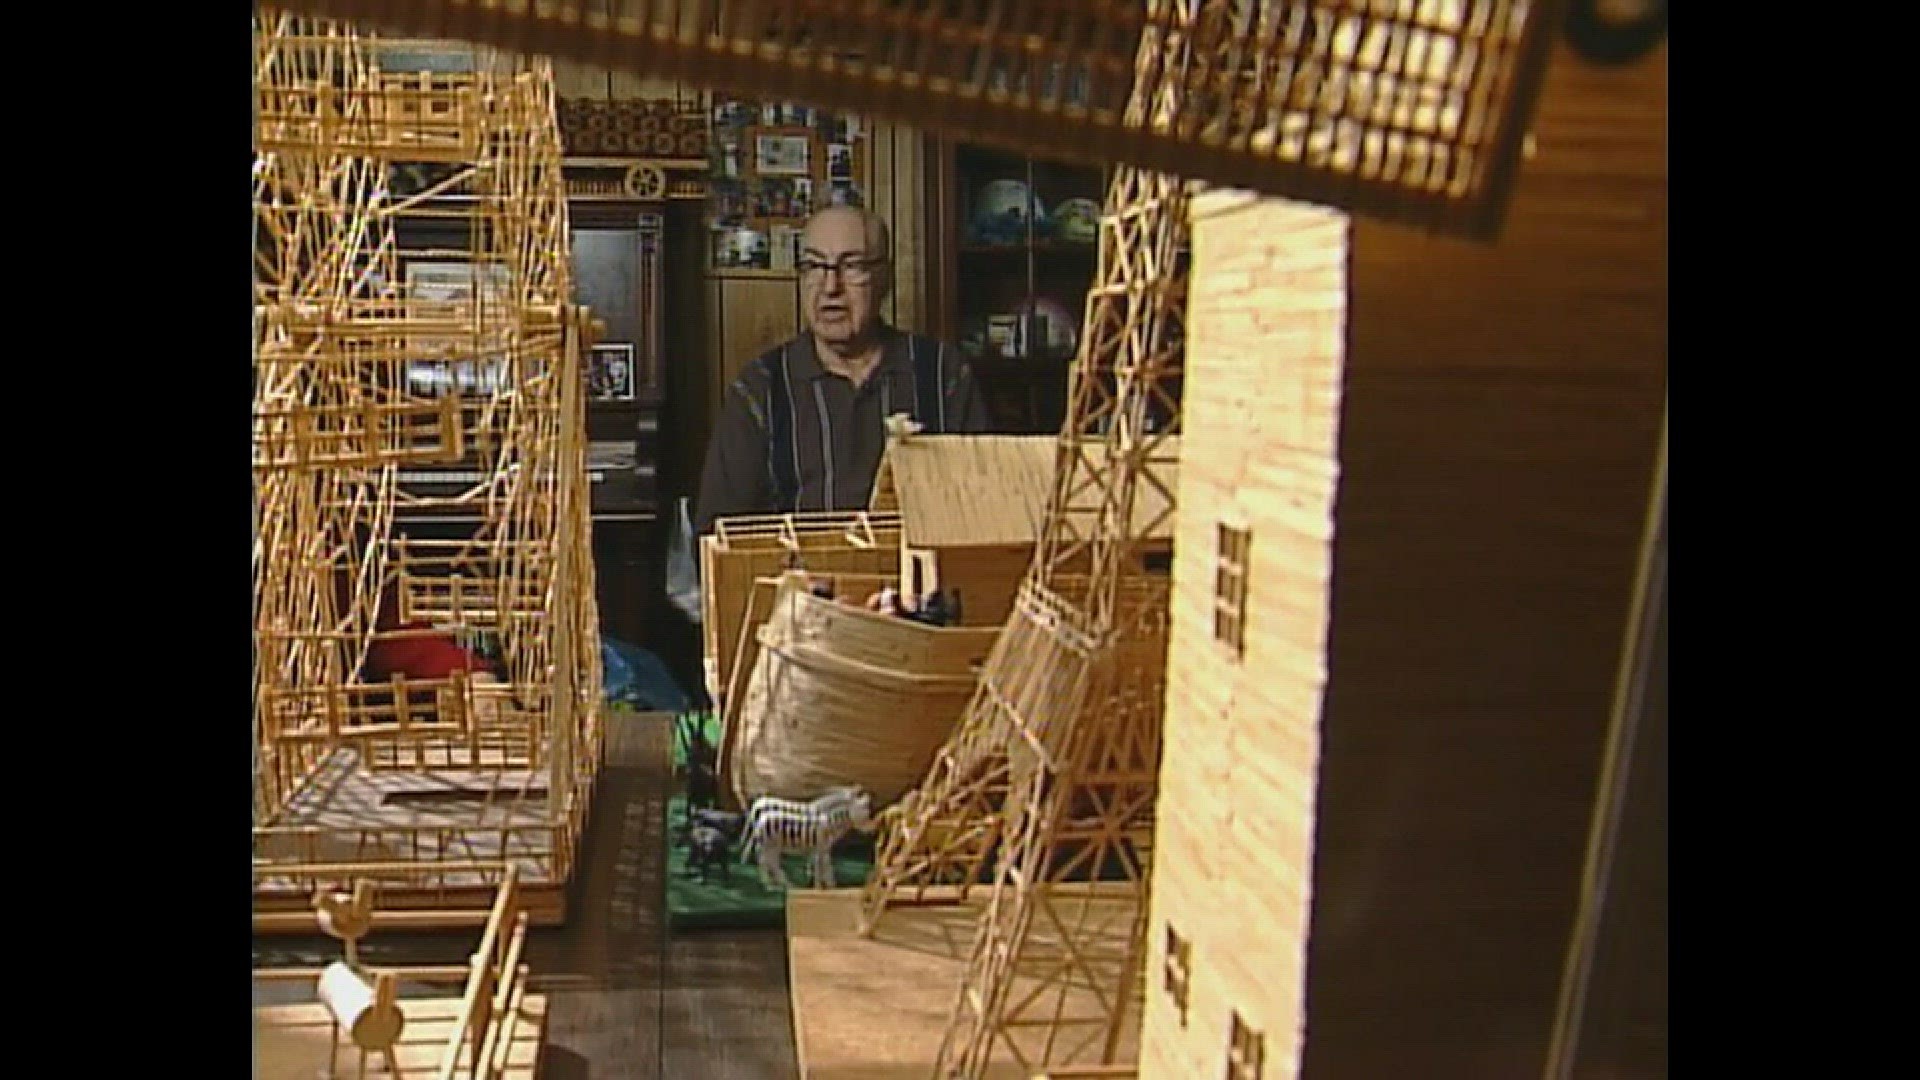 Reuben Calcutt was a toothpick artist from Kewanee. This story originally aired in 2003.